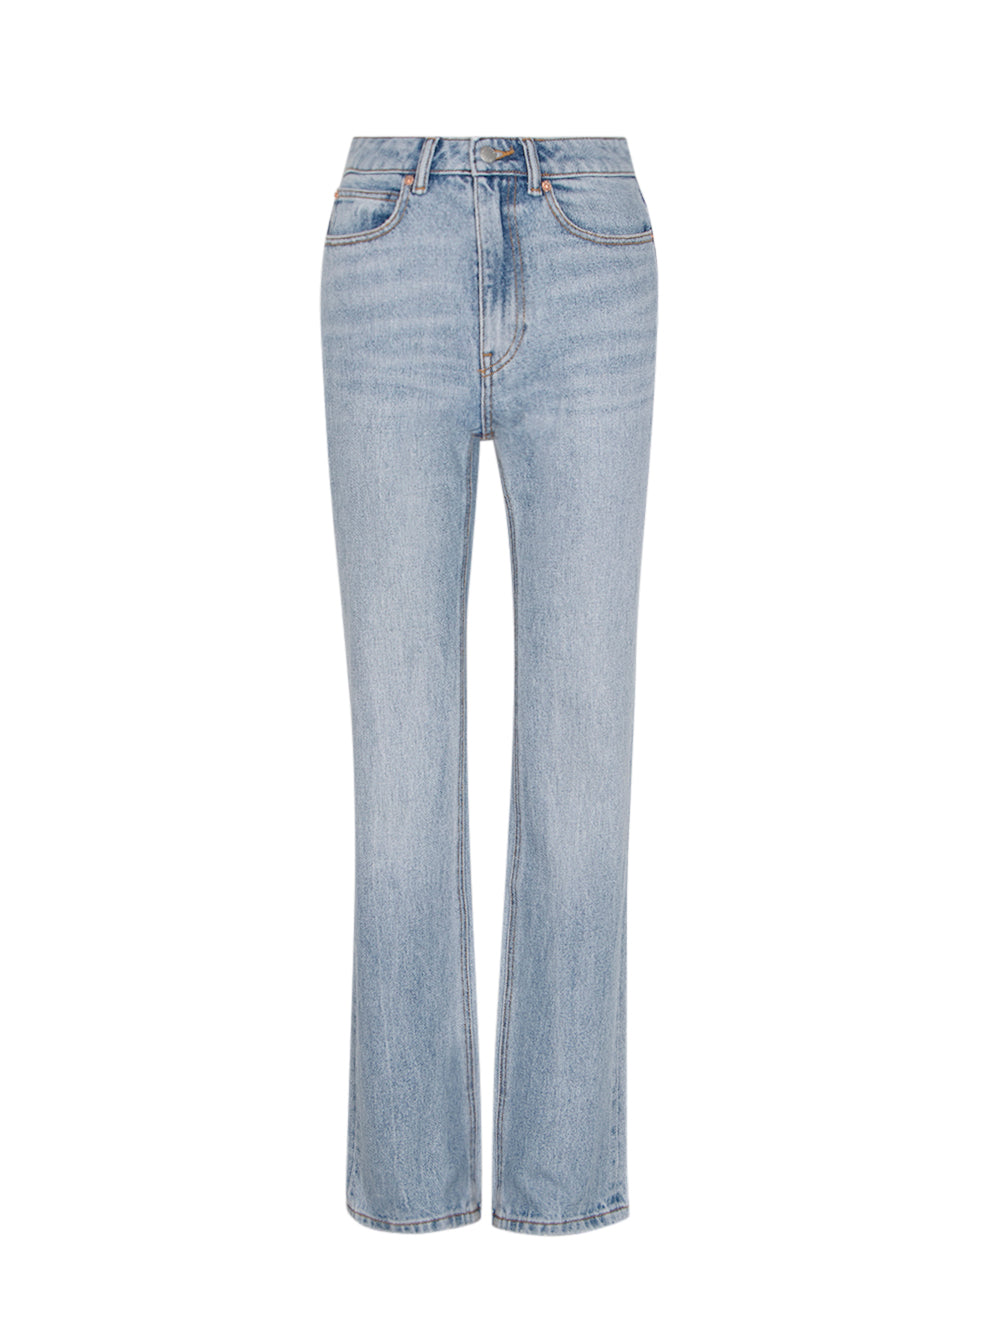 Alexander-Wang-Fly-High-Rise-Stacked-Jean-In-Denim-01